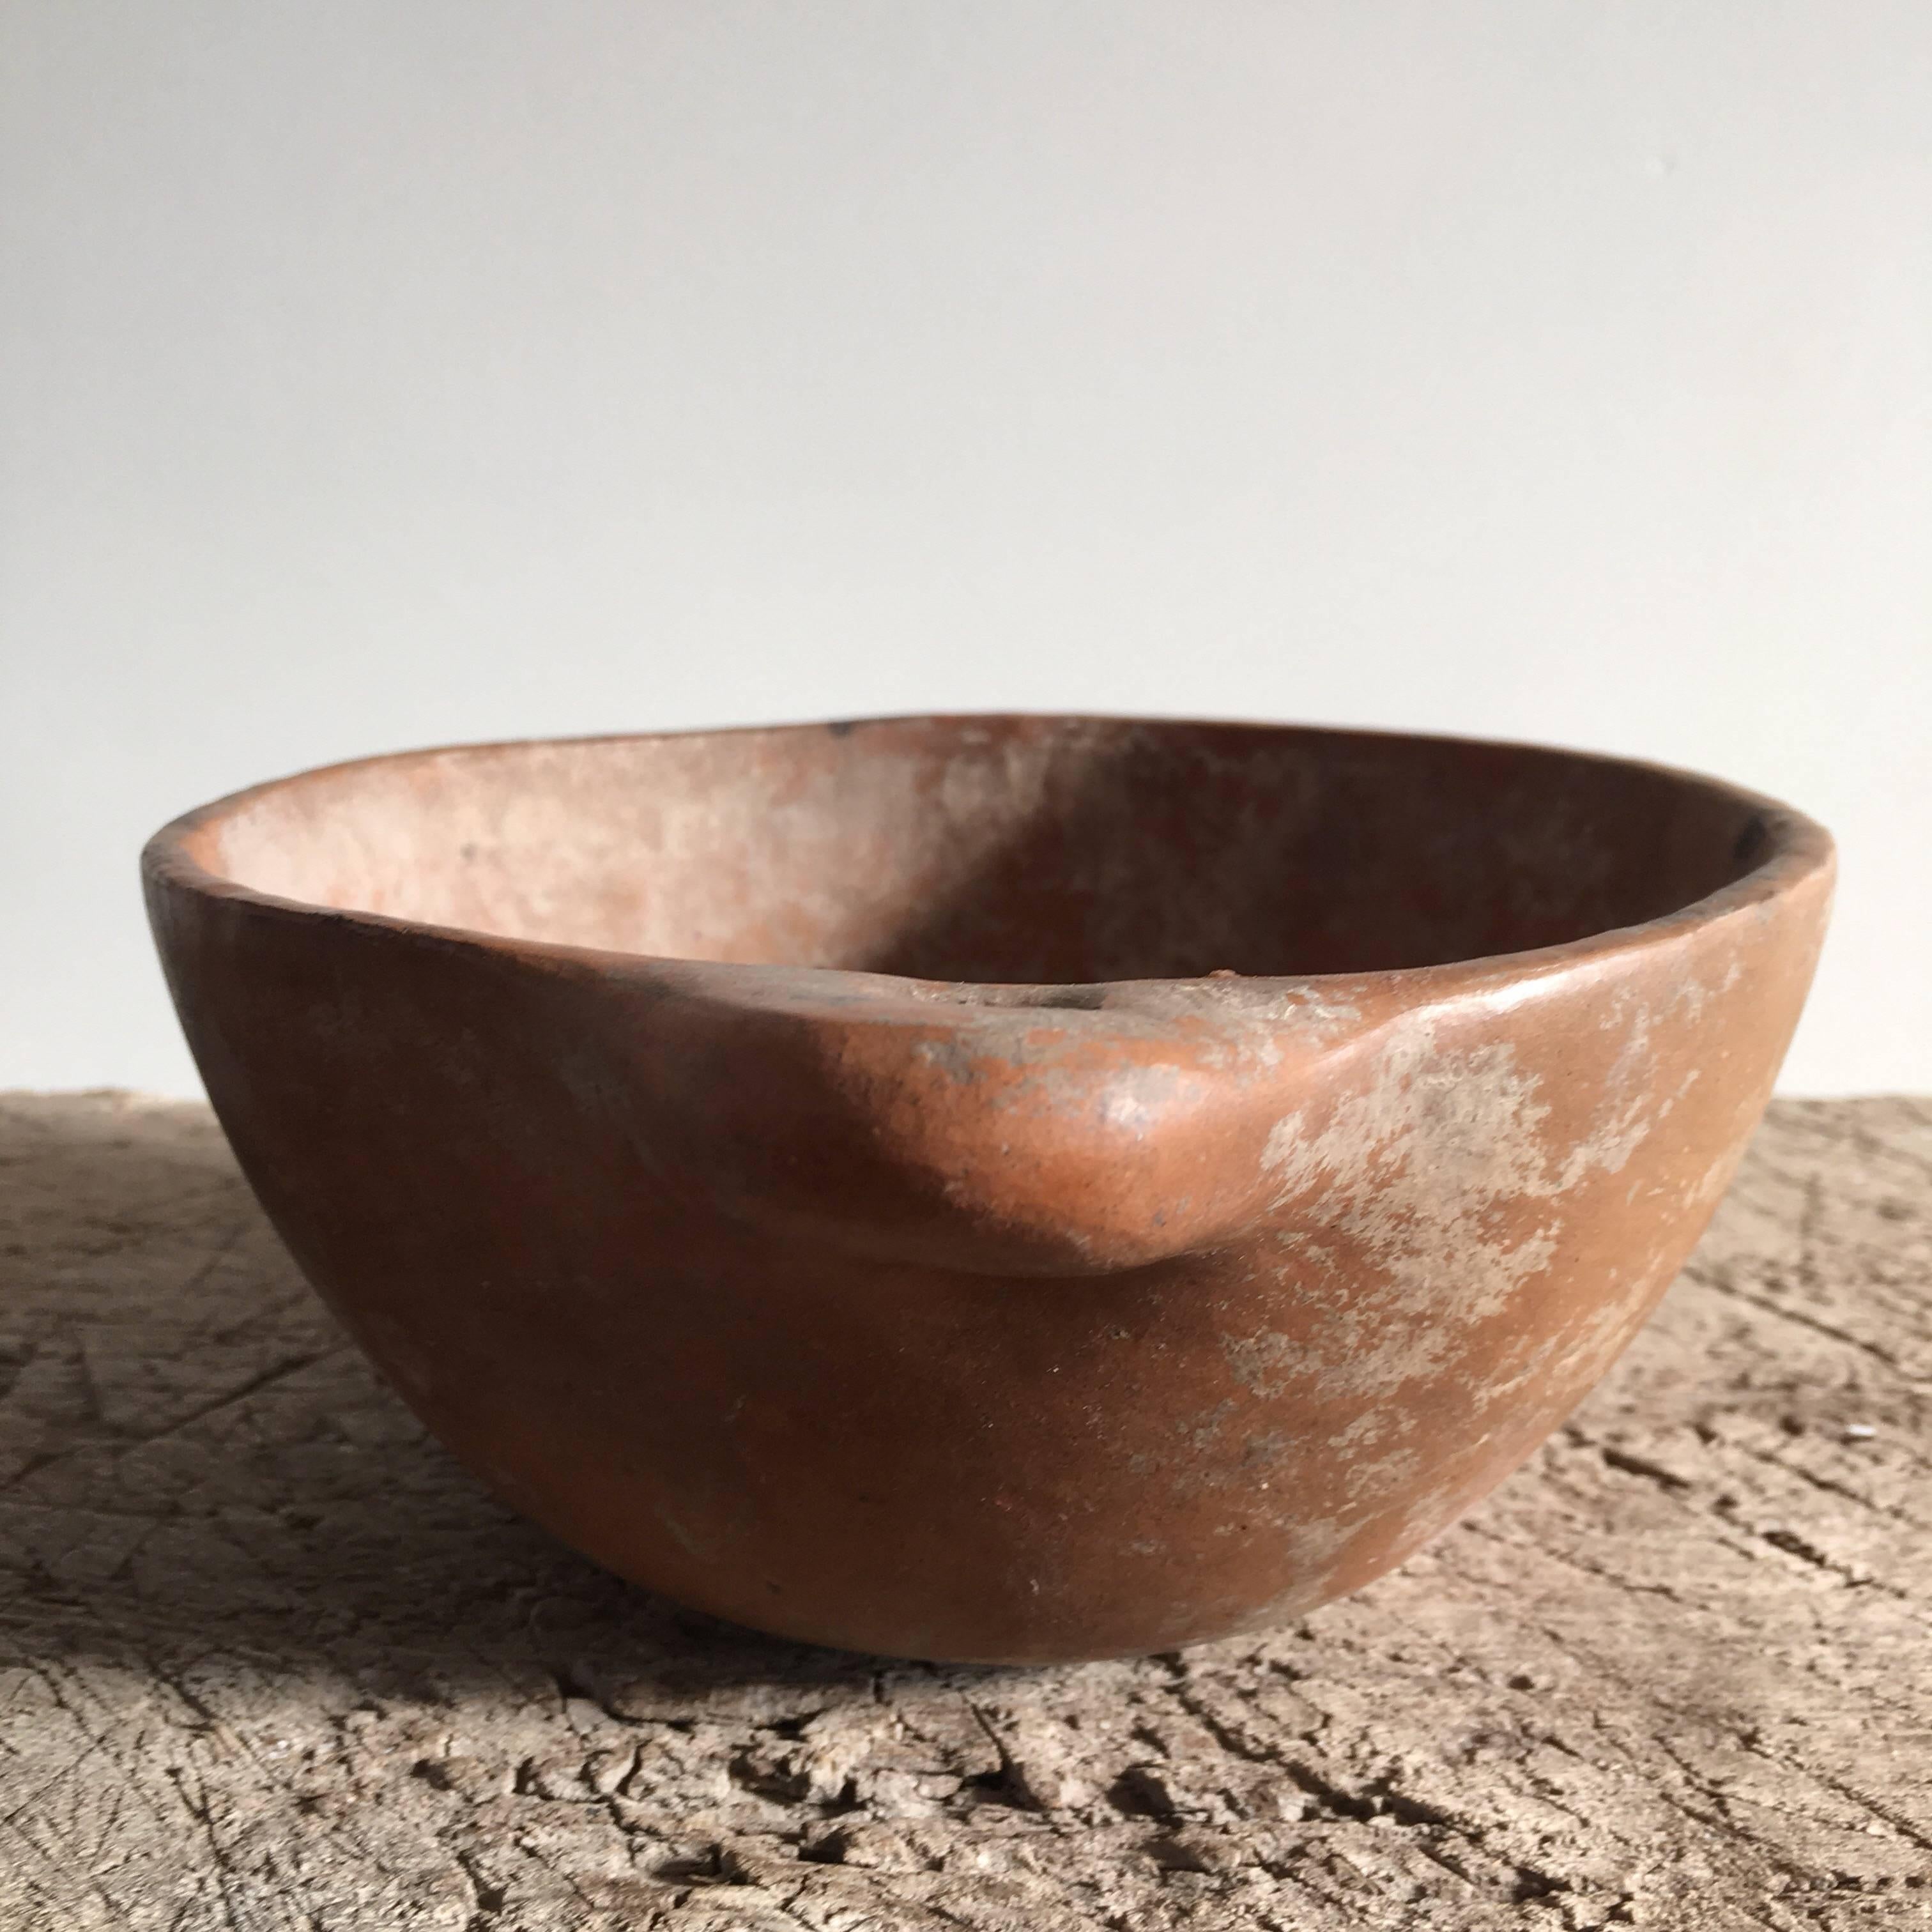 Petit terracotta serving bowl from the state of Guerrero.